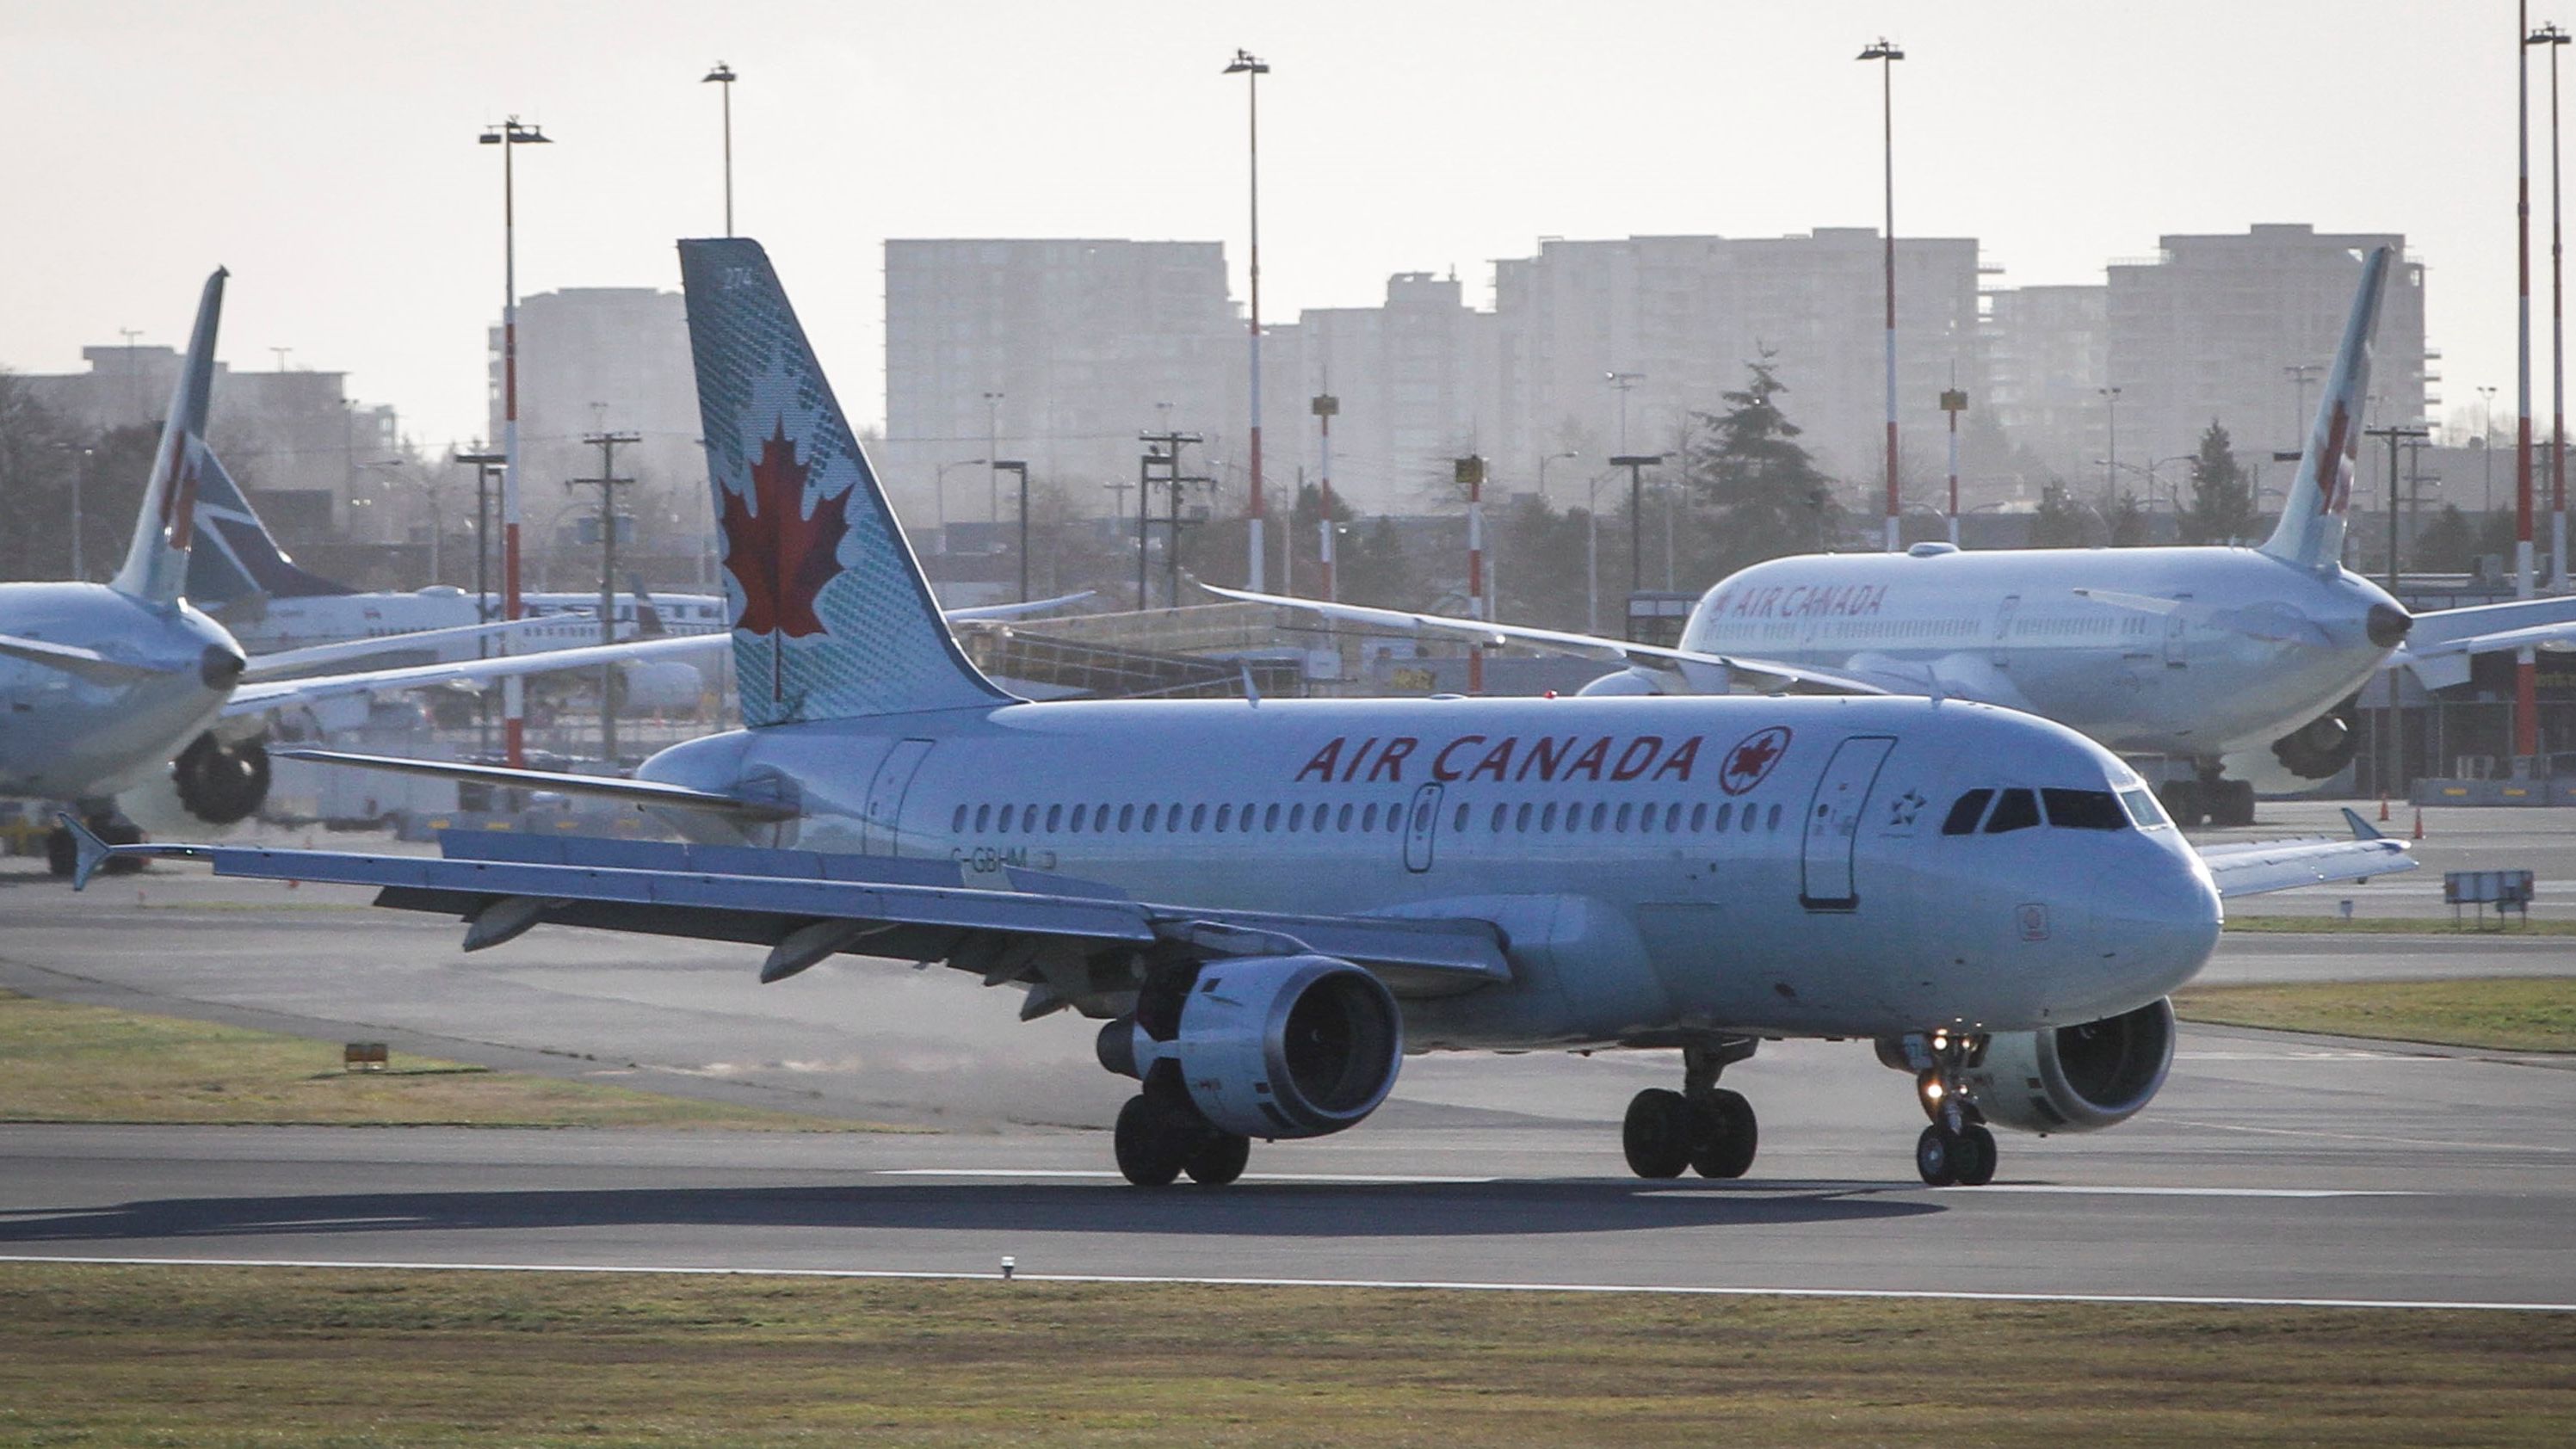 Air Canada aircraft are seen on the runway of Vancouver International Airport in Richmond, British Columbia, in a 2021 photo.